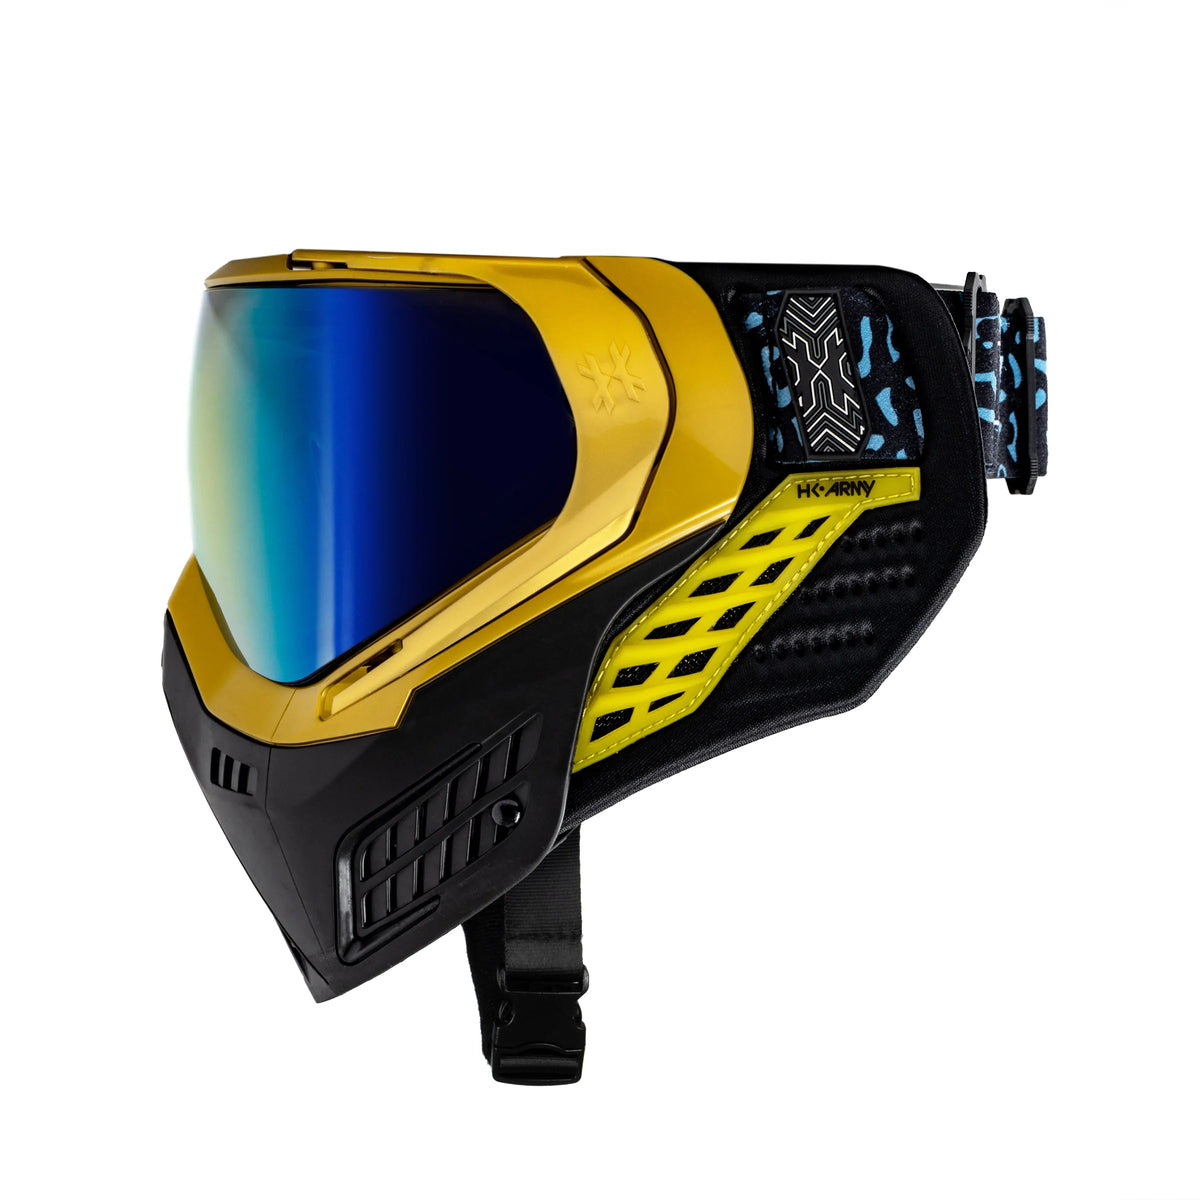 Klr Goggle Blackout Gold (Gold/Black) | Paintball Goggle | Mask | Hk Army